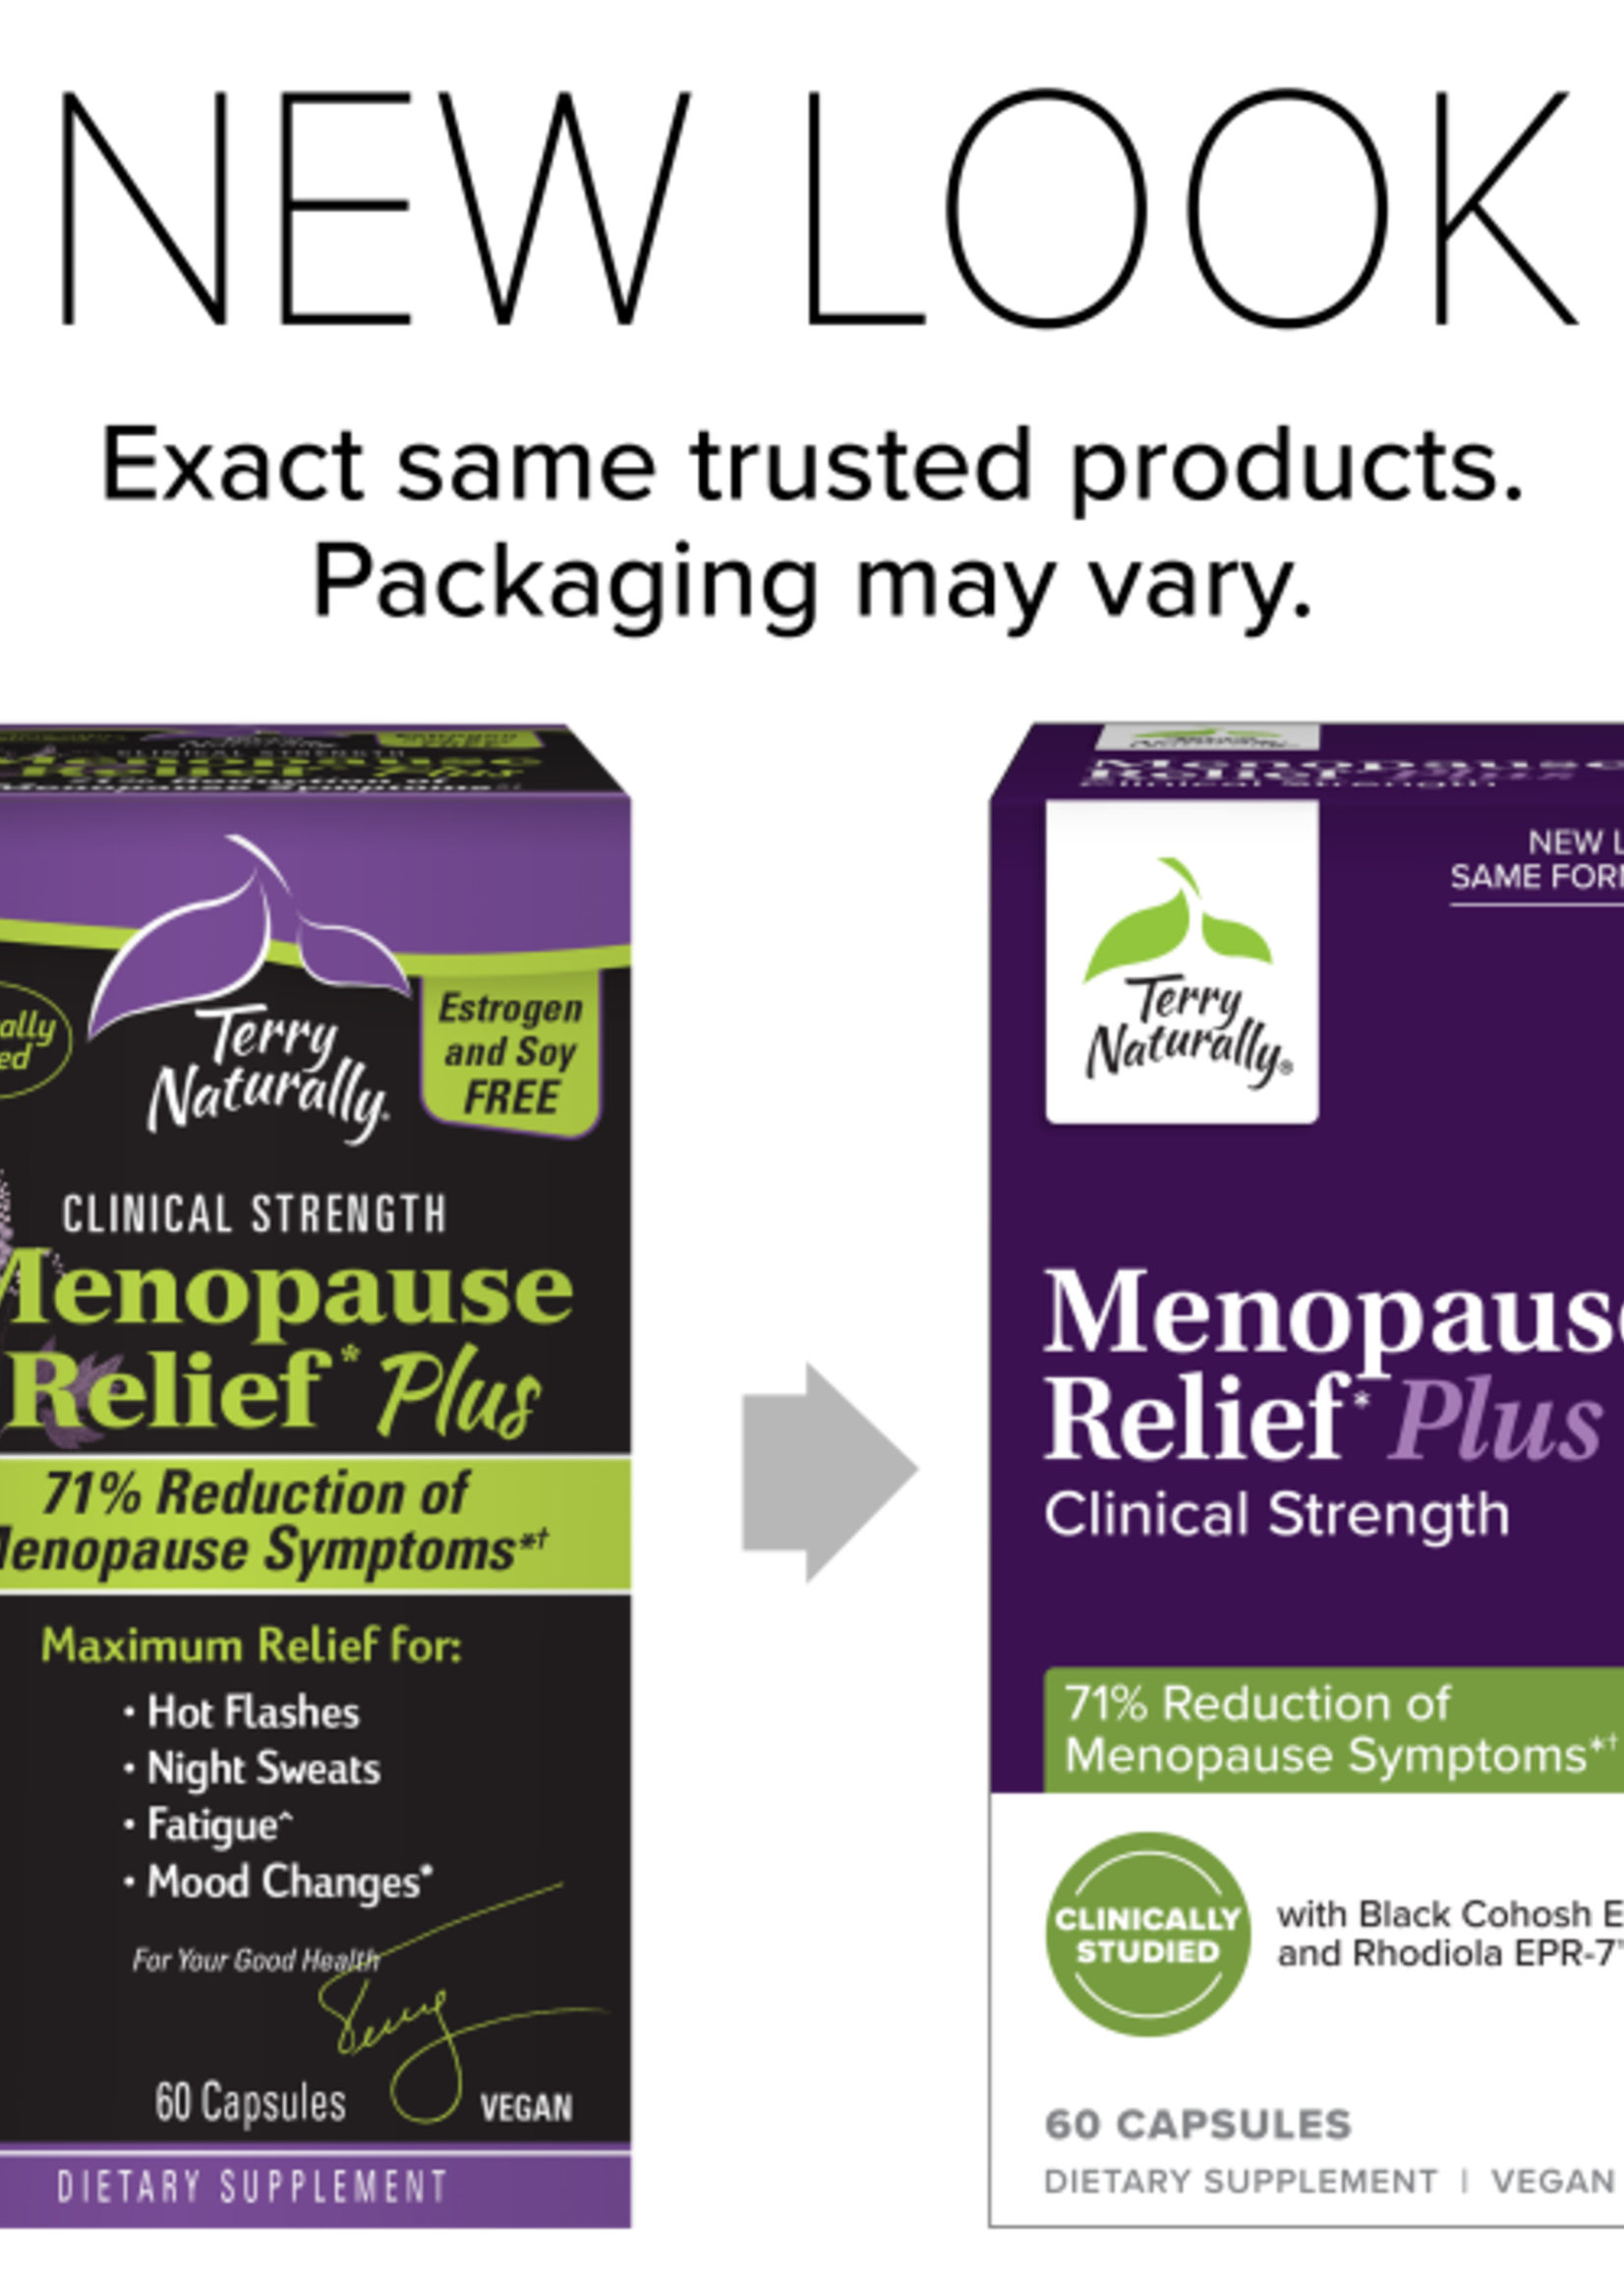 Menopause Relief* Plus Clinical Strength